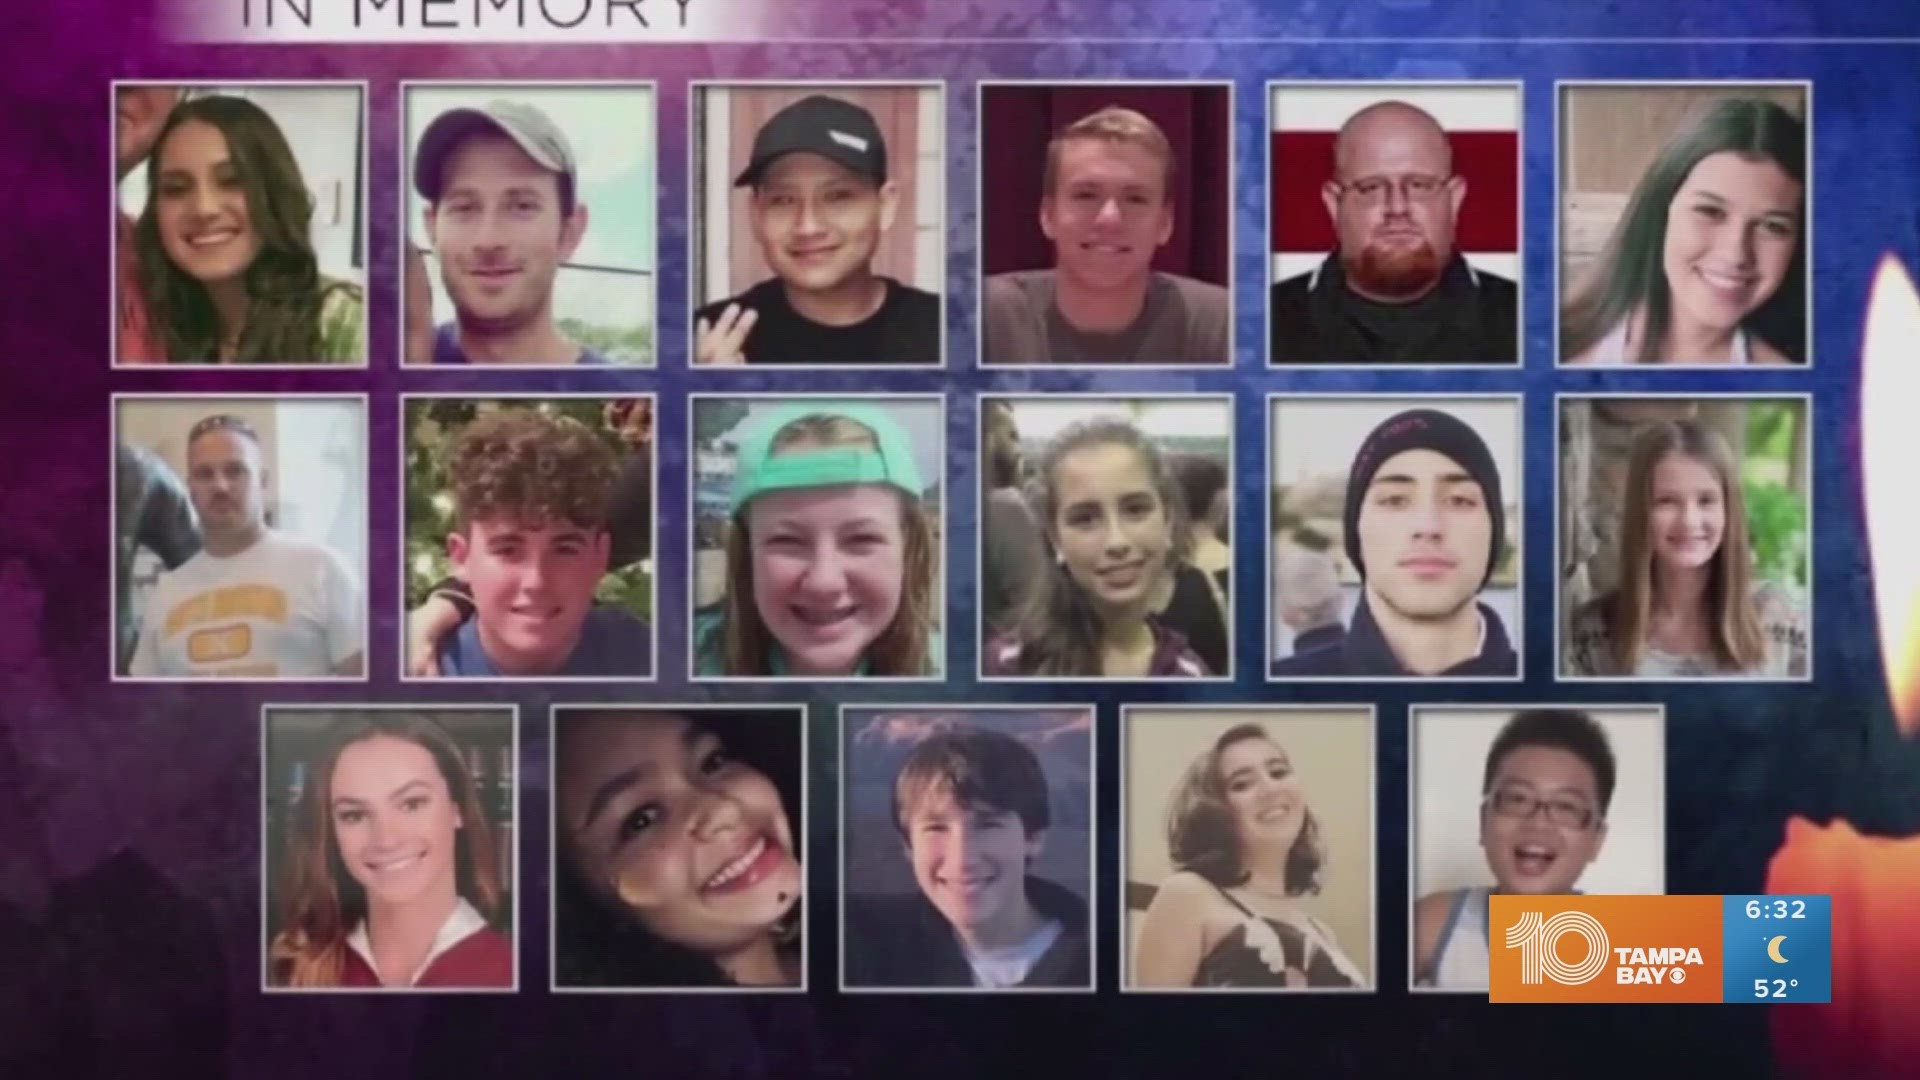 It is now 6 years since 17 lives were lost in the Marjory Stoneman Douglas High School shooting.